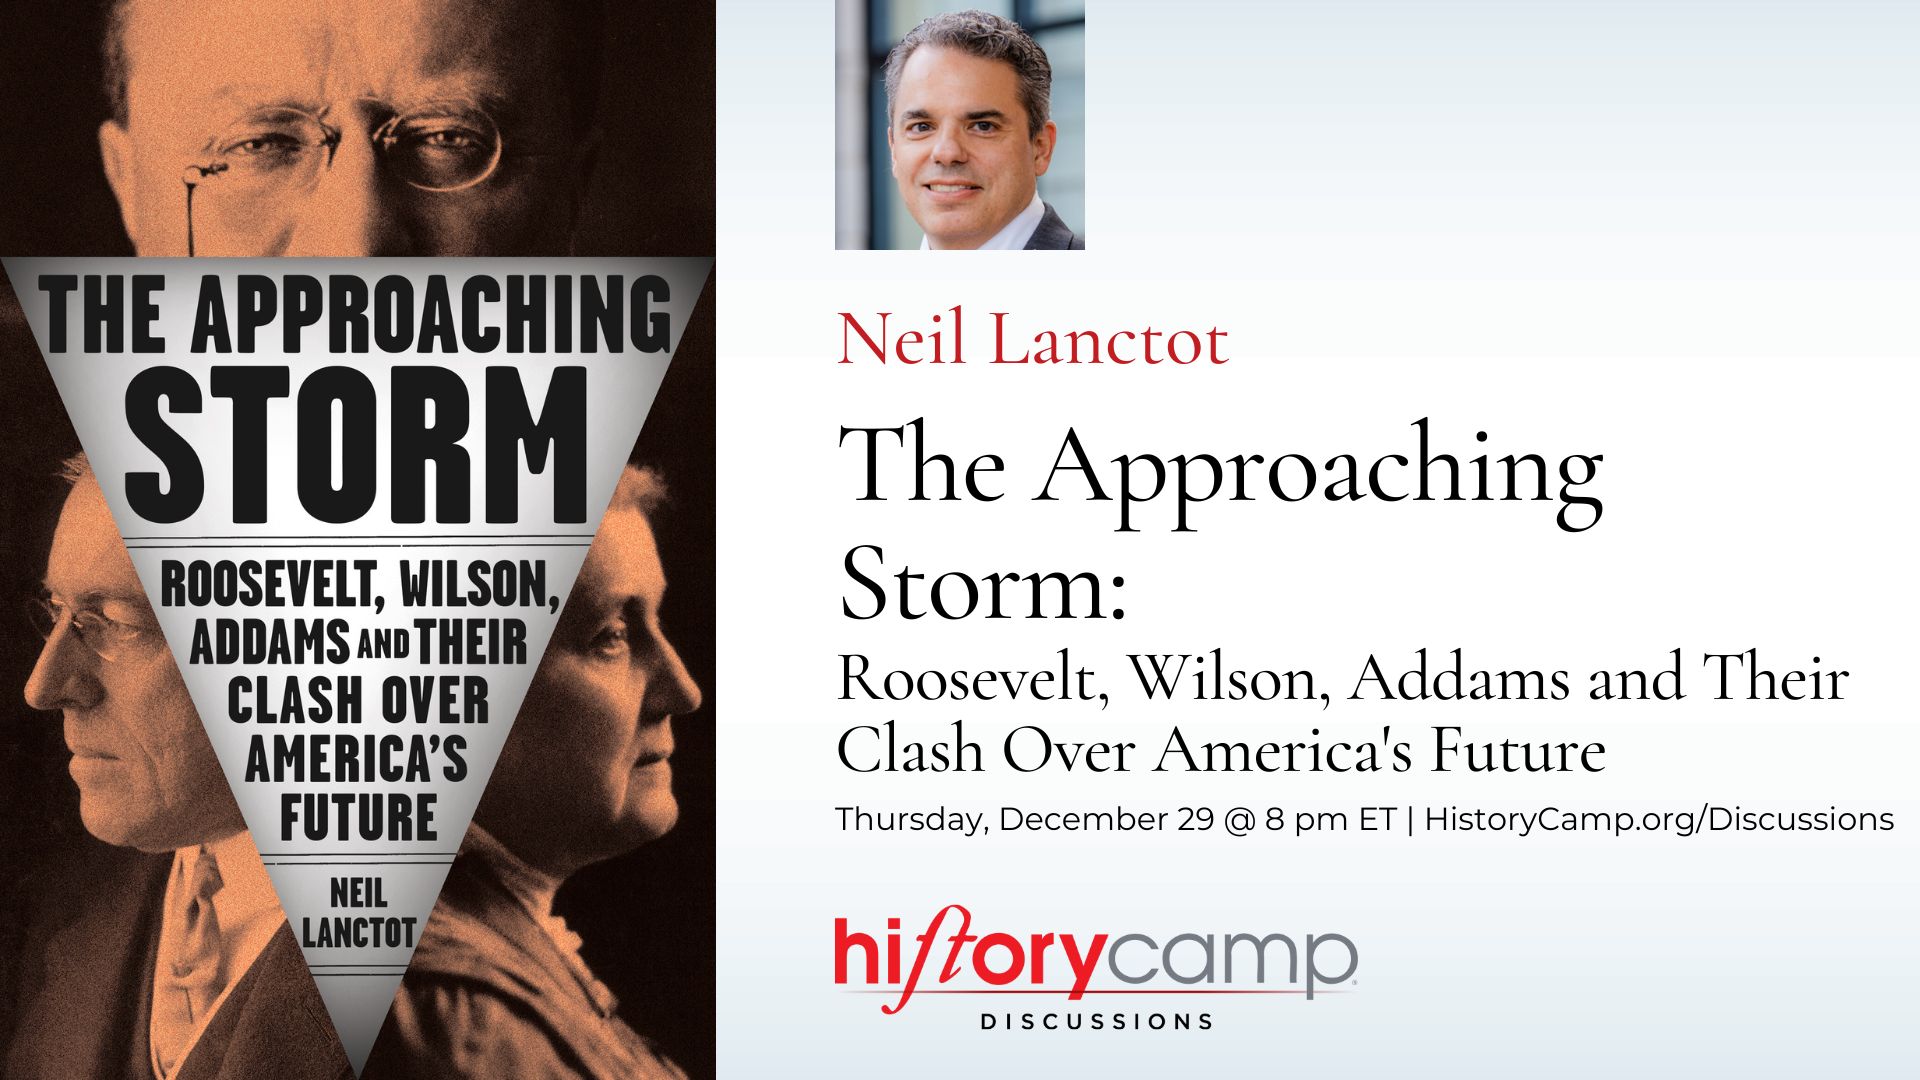 History Camp Discussion with Neil Lanctot, author of "The Approaching Storm: Roosevelt, Wilson, Addams and Their Clash Over America's Future"